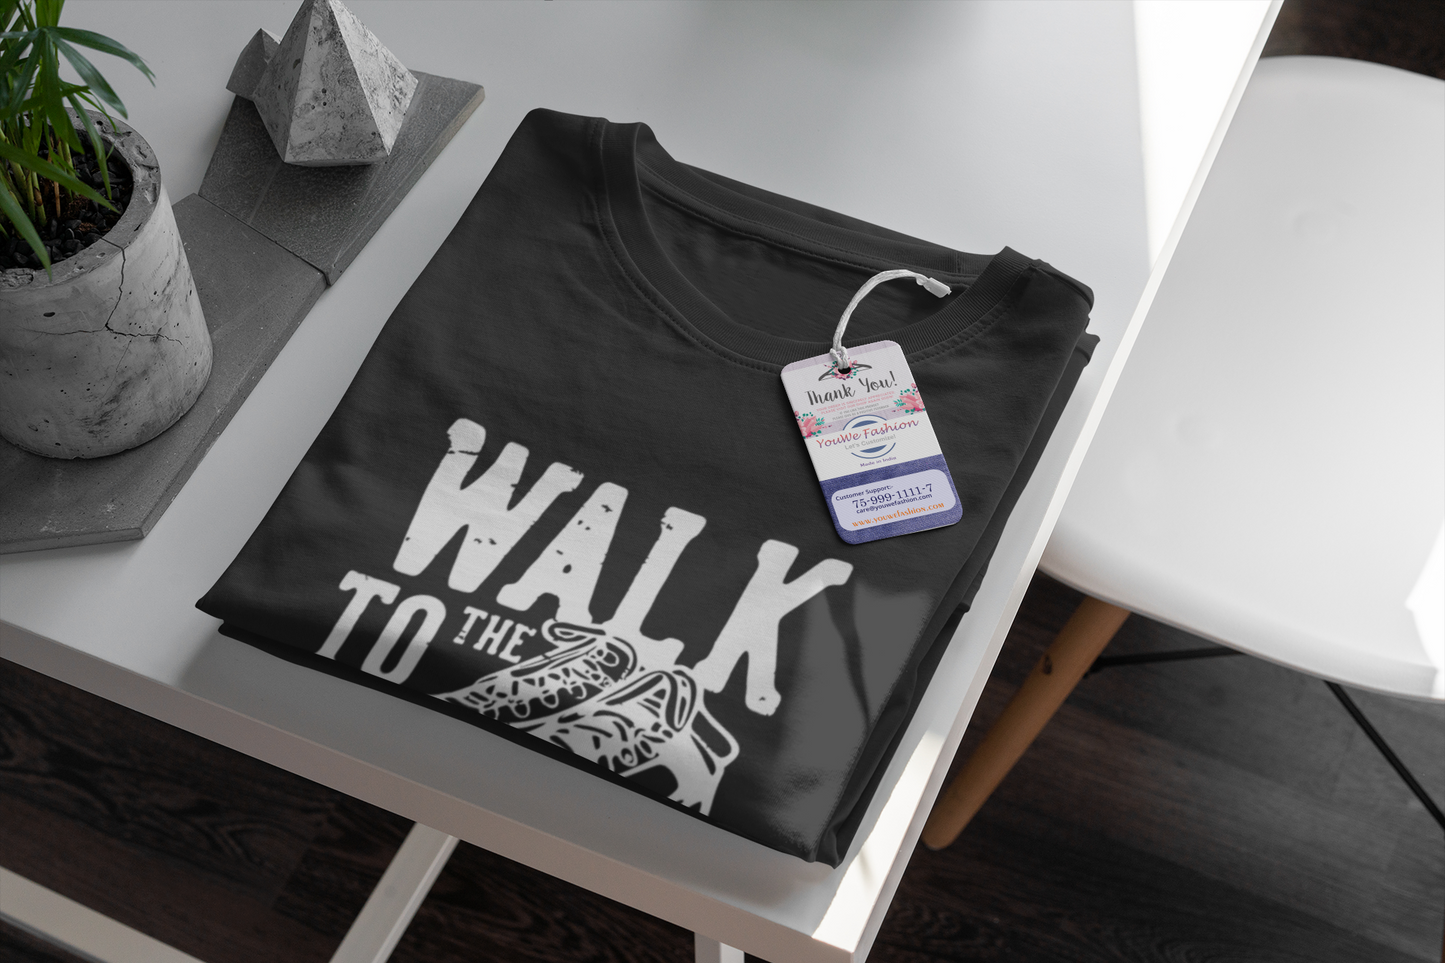 YouWe Fashion "Walk to Wild" Black Cotton T-Shirt for Youth (S-XL)